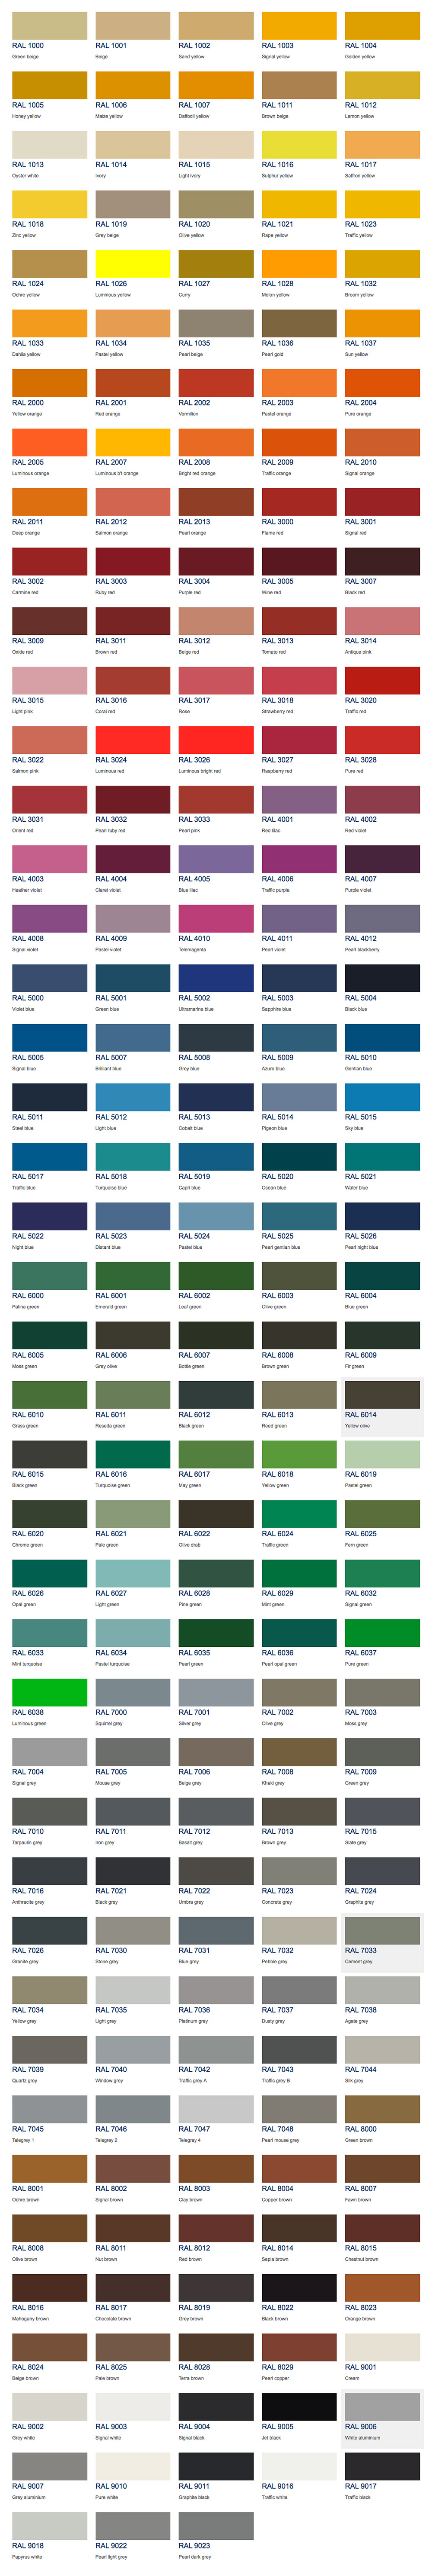 ral to pantone conversion table